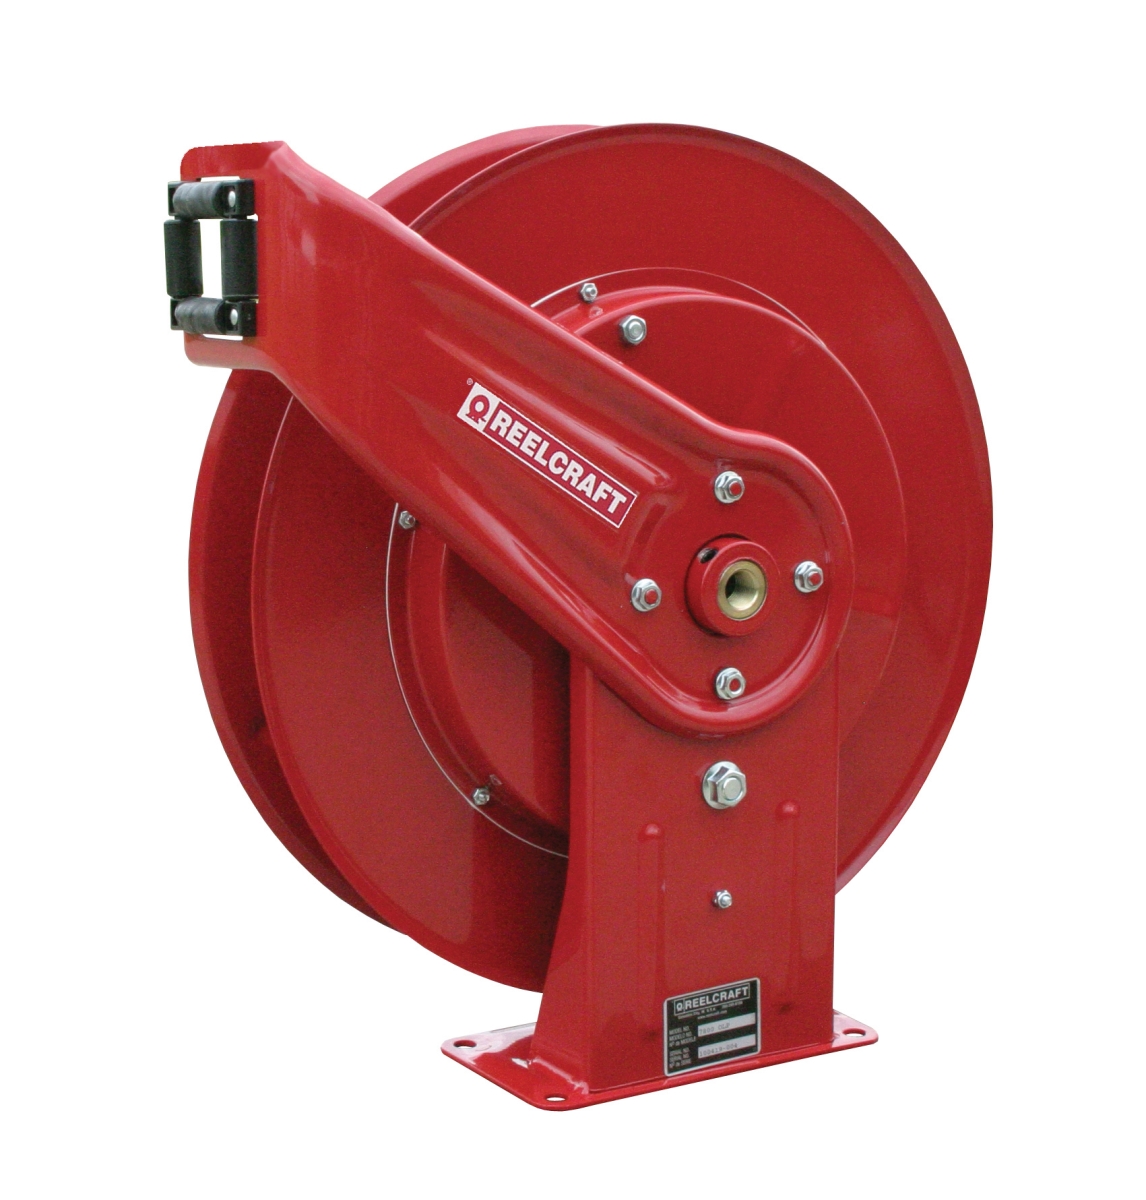 7600 Ohp 0.375 In. X 50 Ft. Heavy Duty 5000 Psi Grease Without Hose Reel, Red